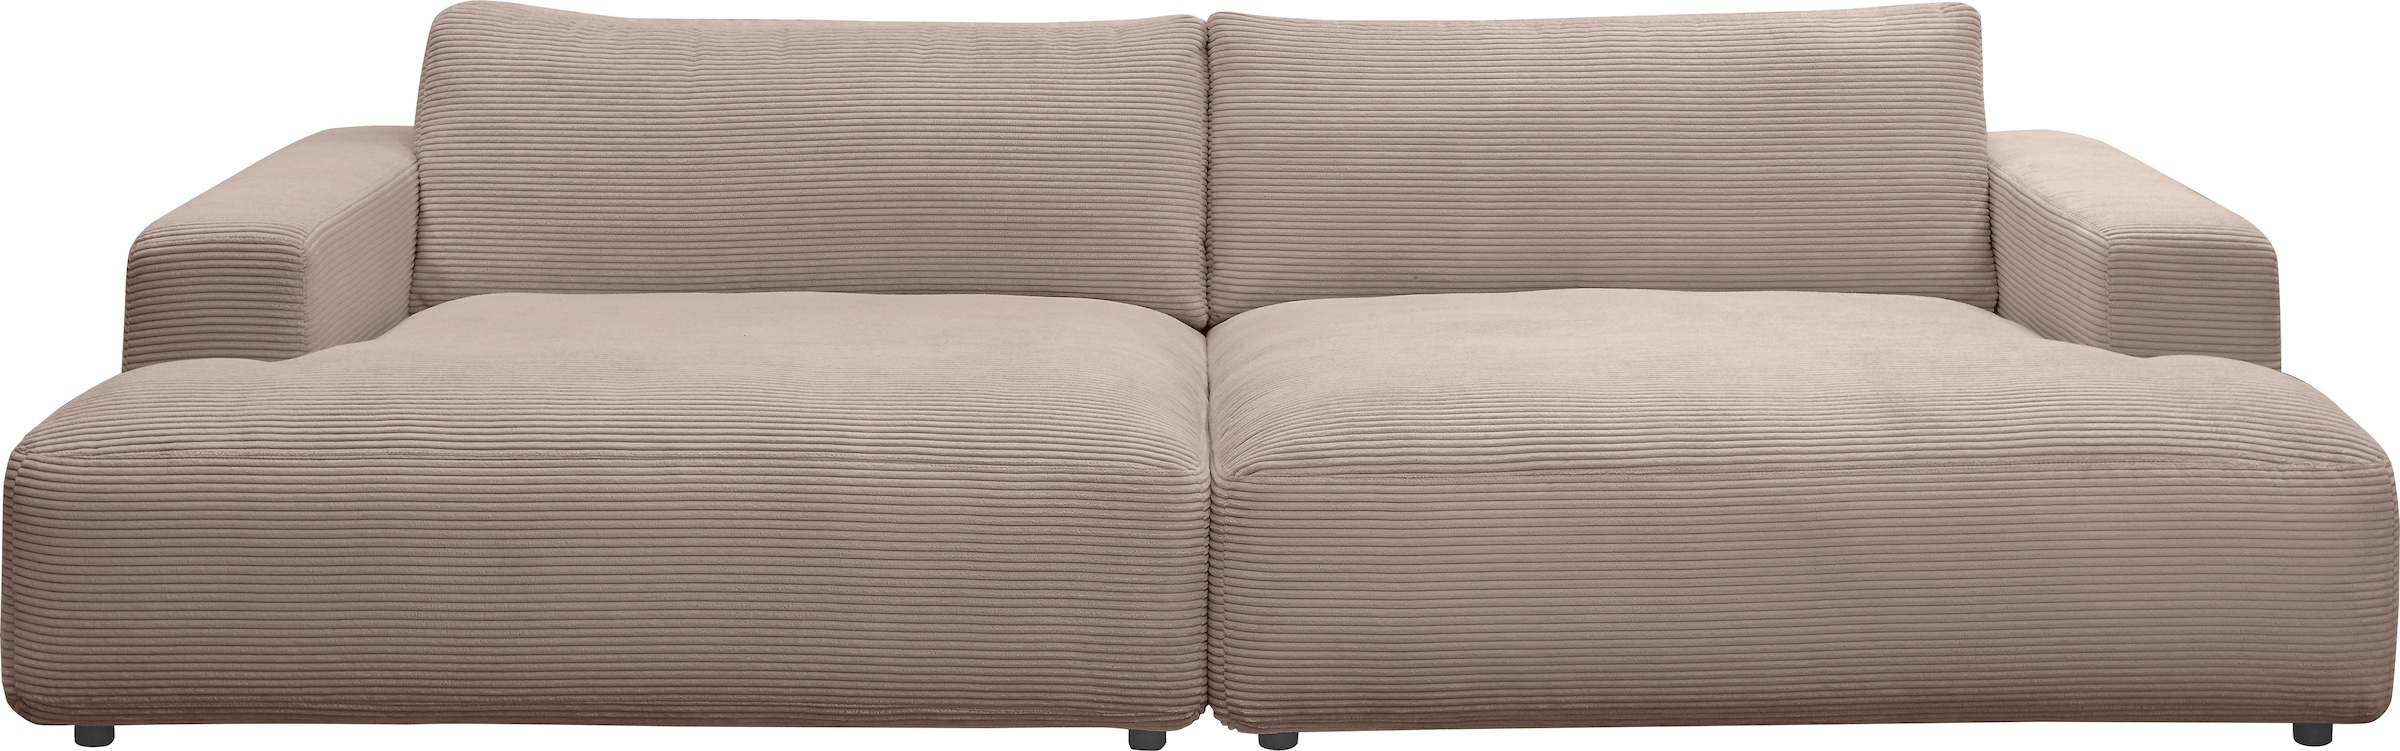 GALLERY M branded OTTO Loungesofa by Cord-Bezug, 292 Online cm »Lucia«, Musterring Breite Shop